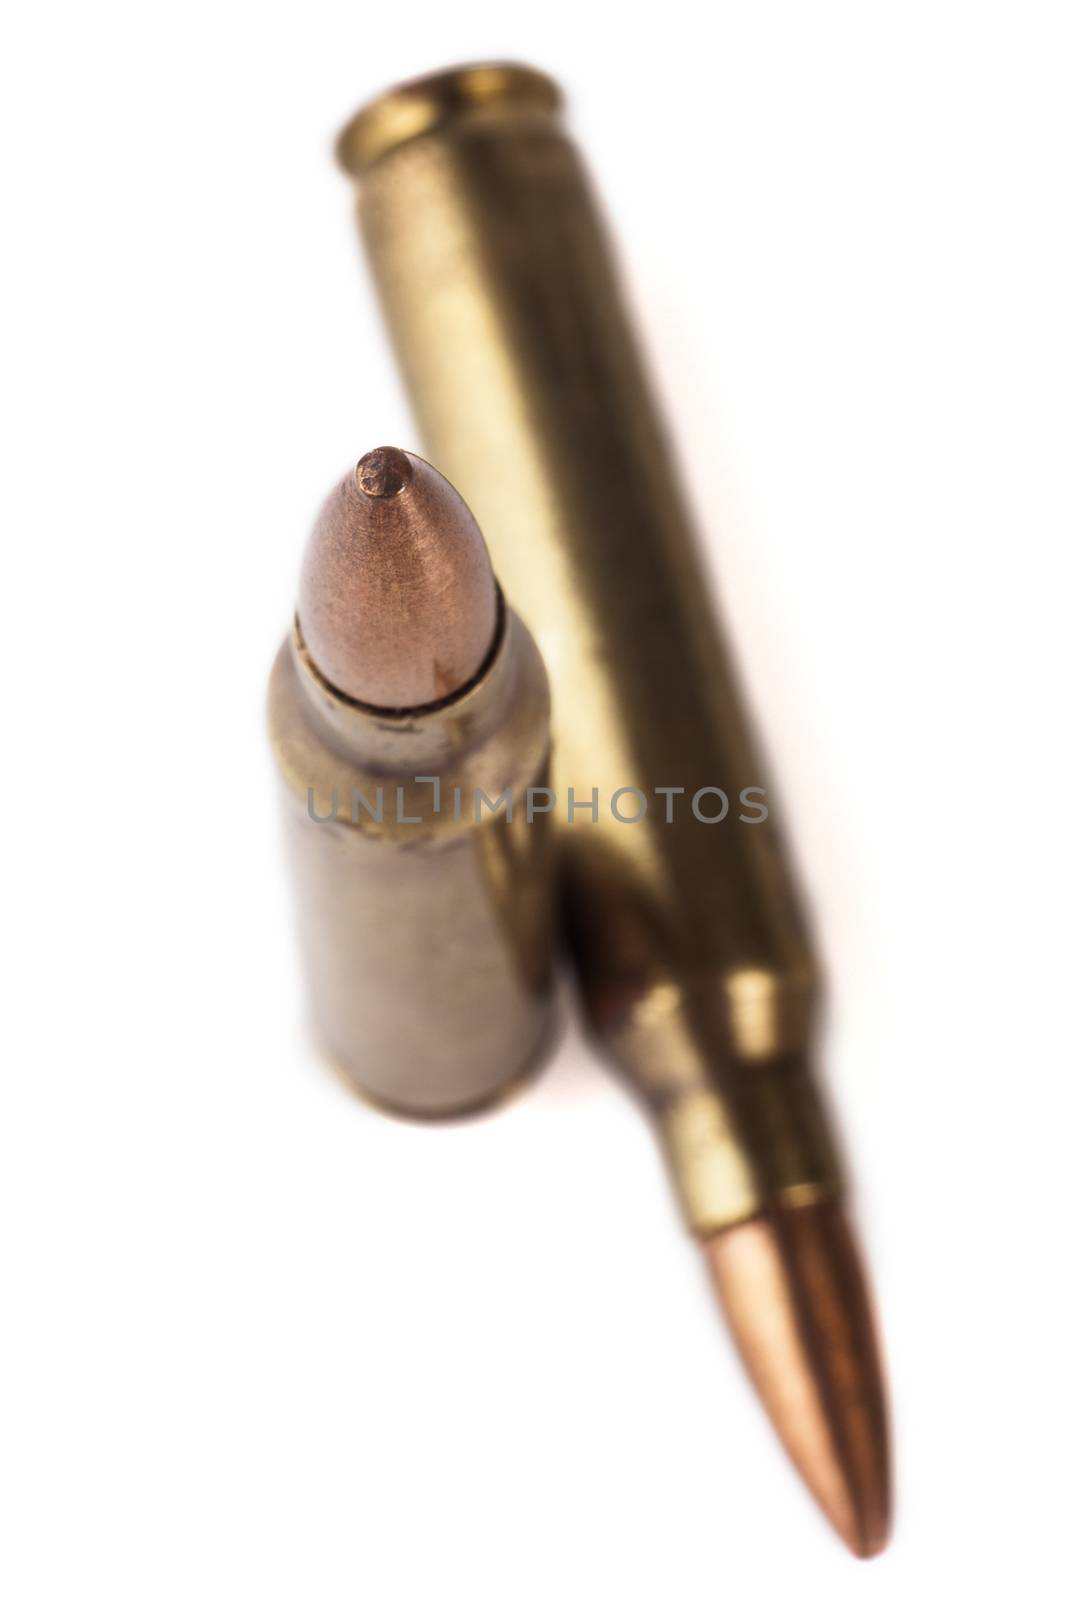 Rifle Bullets Isolated on White Background